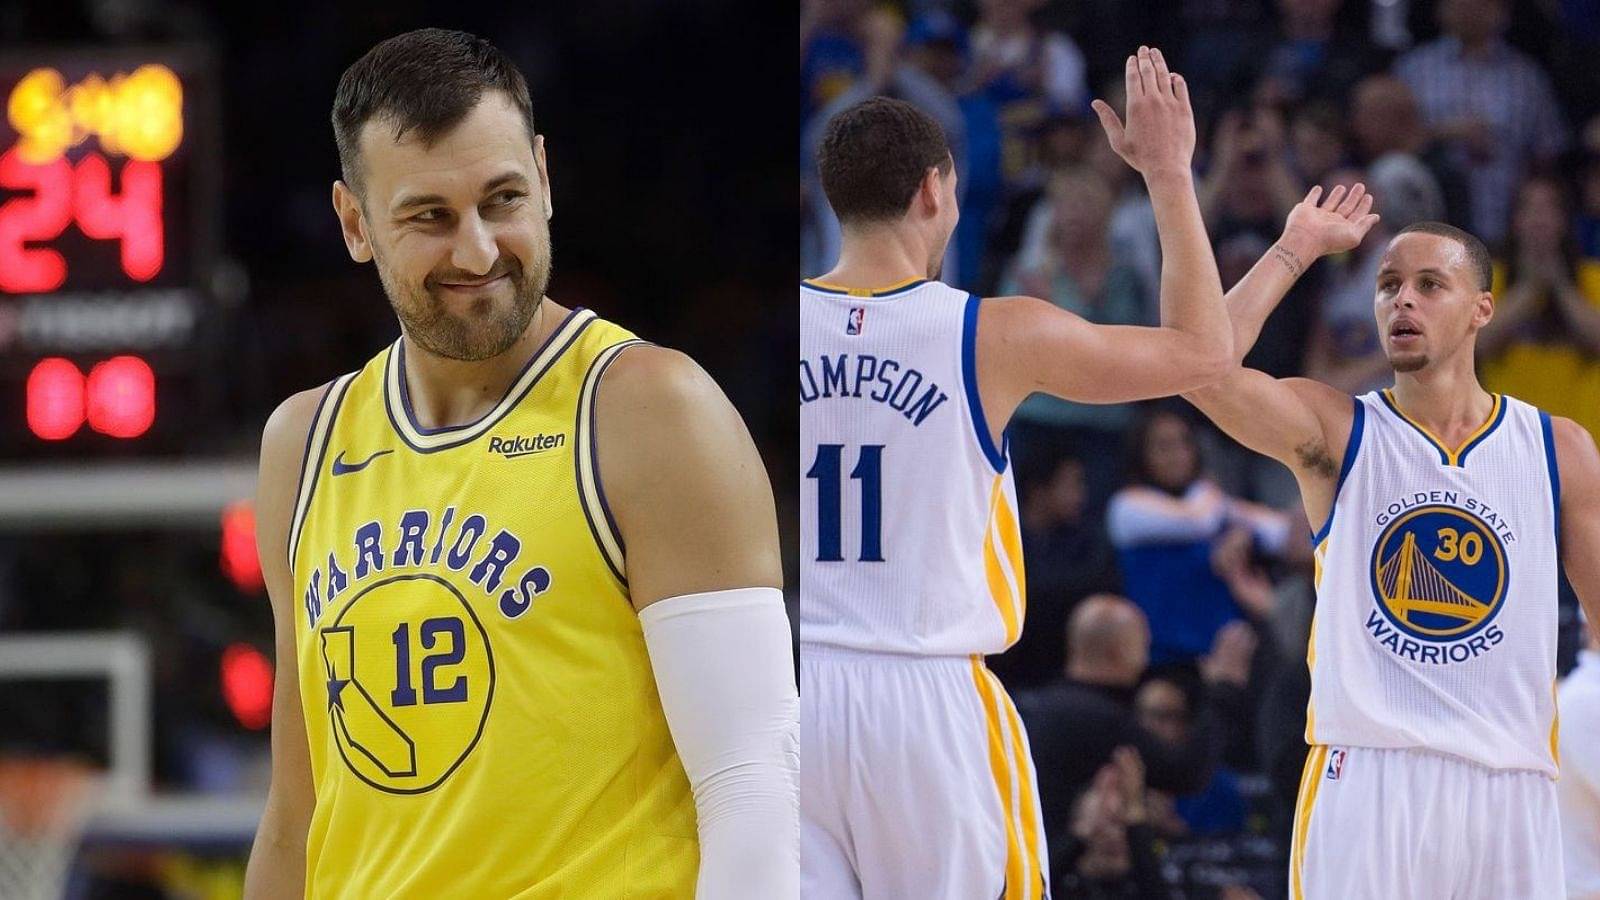 "Dubs have got Steph Curry and Klay Thompson": Andrew Bogut keeps it plain and simple when asked about what separates Warriors offense from others